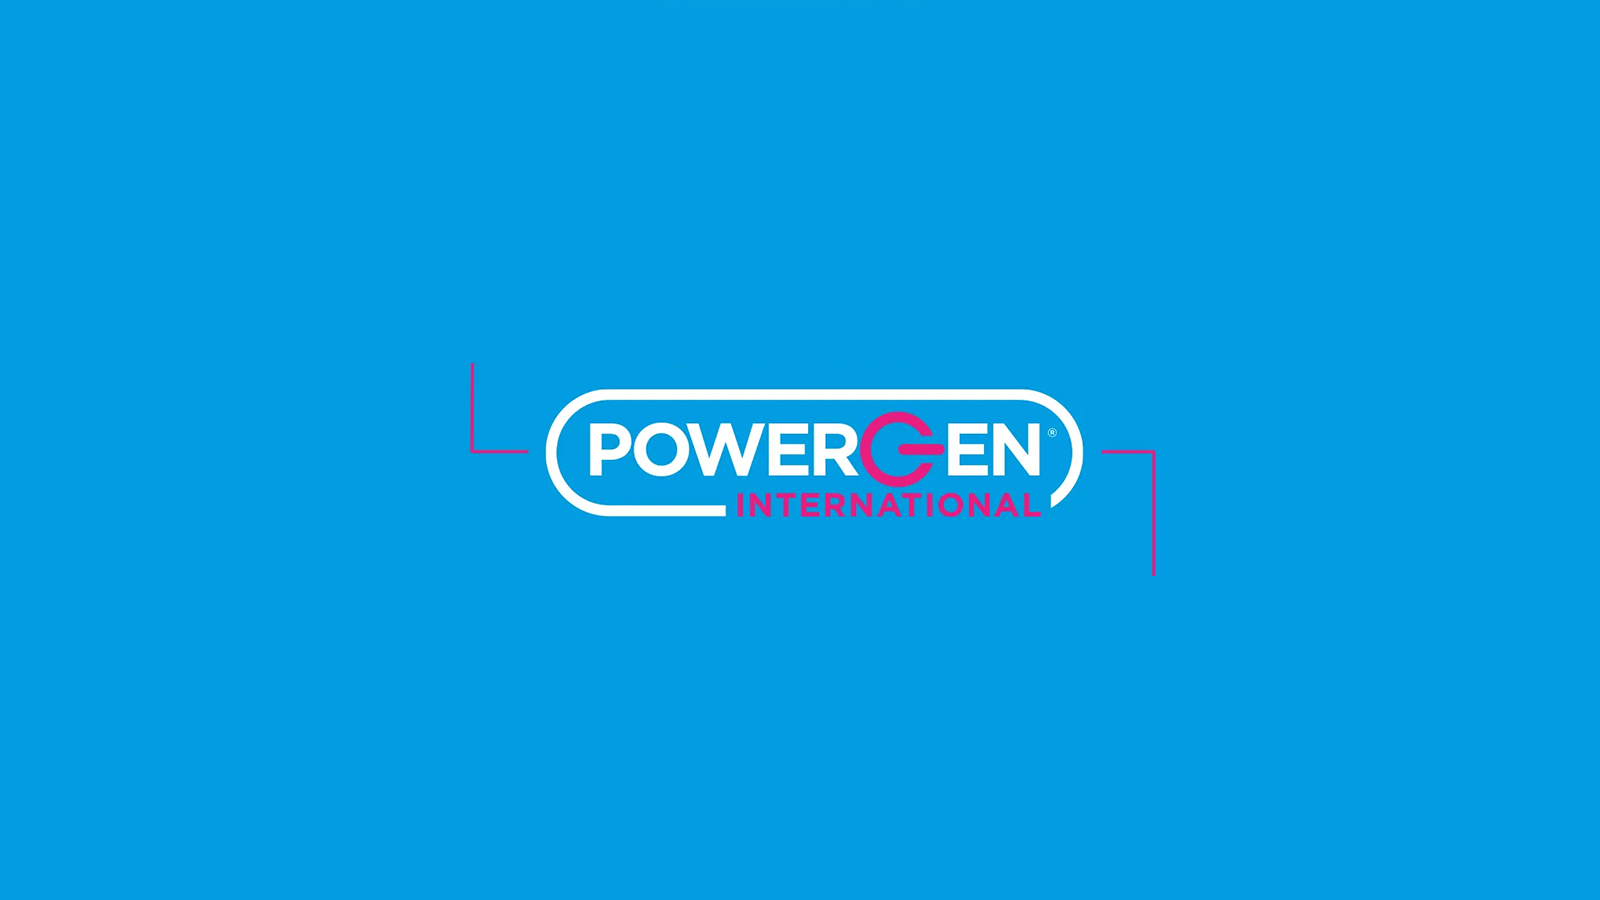 Sargent & Lundy Shares Energy Industry Insights at POWERGEN